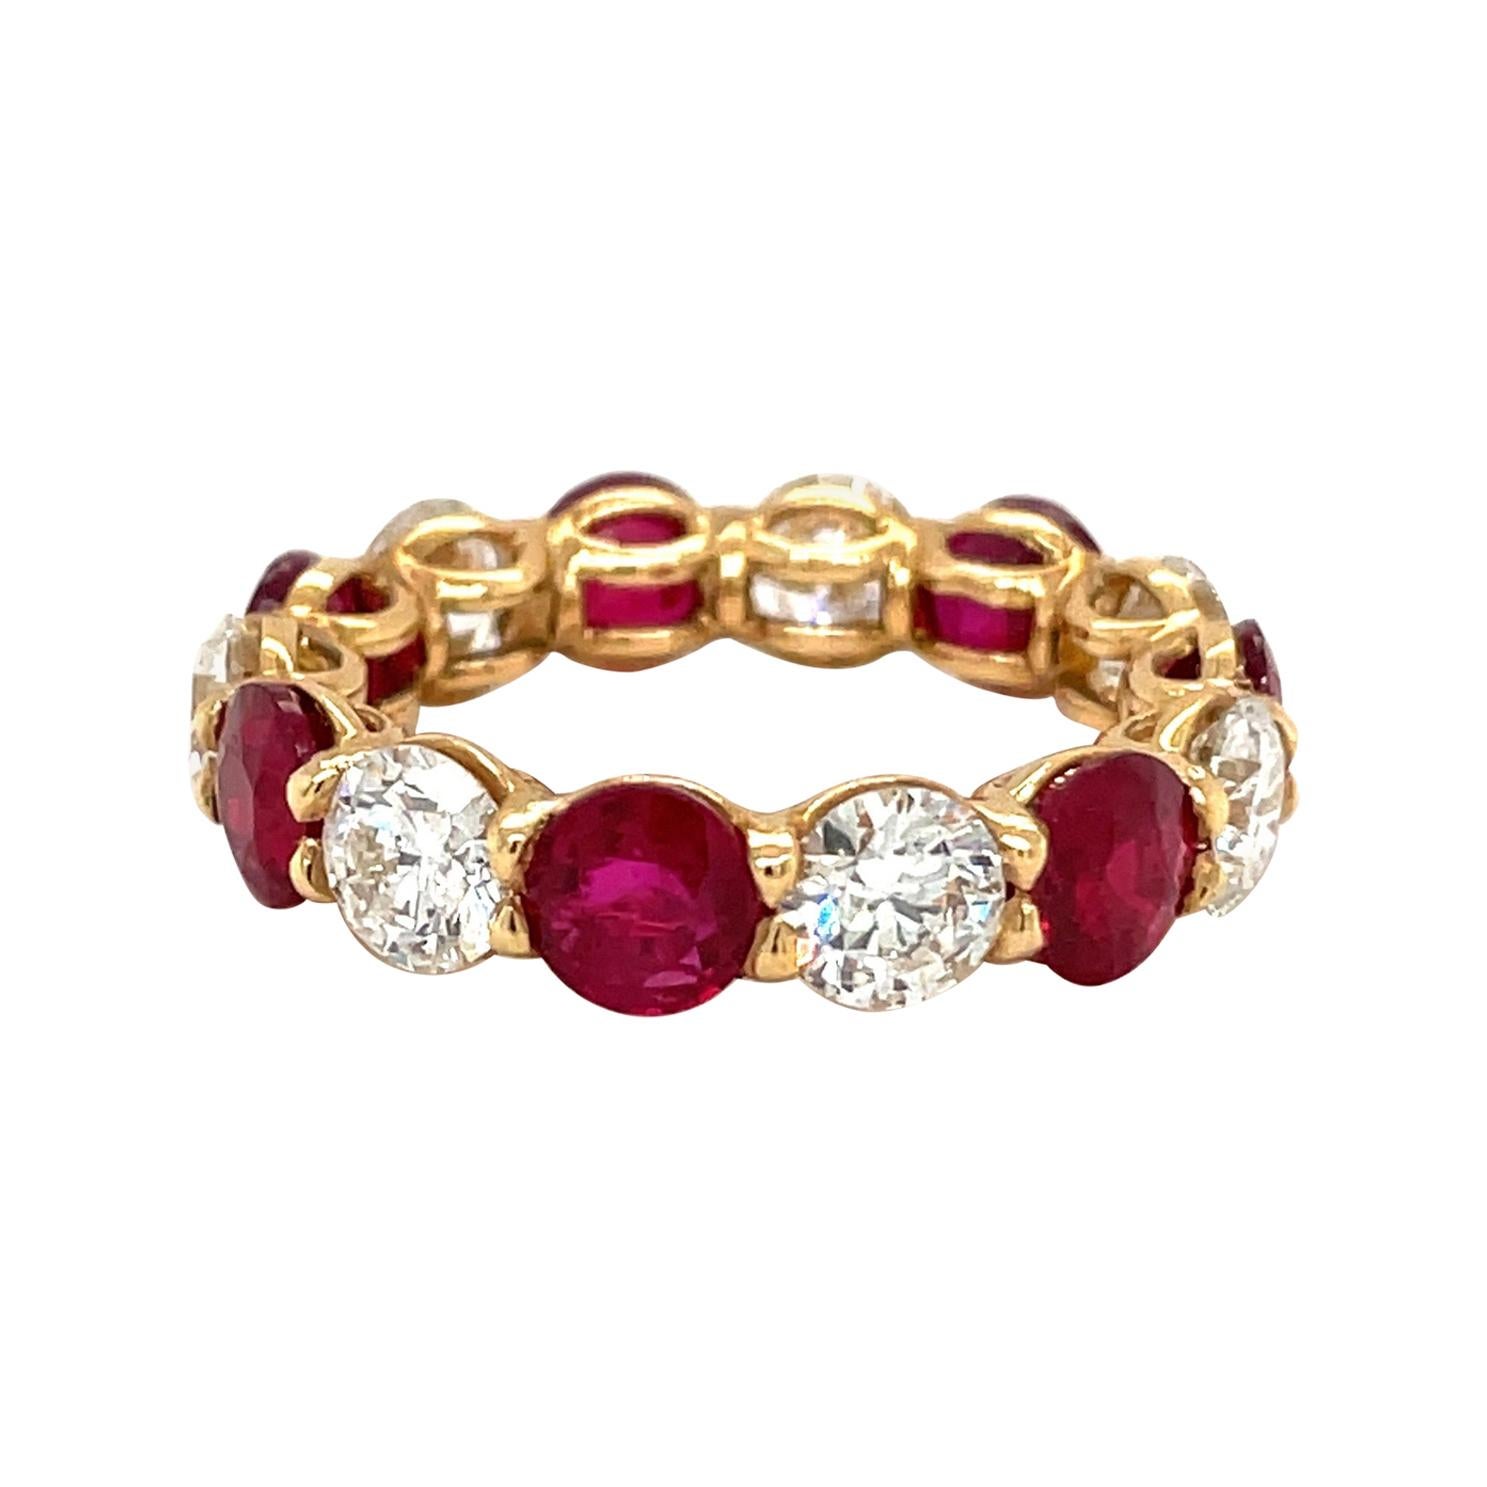 Cellini 18kt Yellow Gold 3.99ct Ruby & 2.93ct Diamond Uternity Band Ring